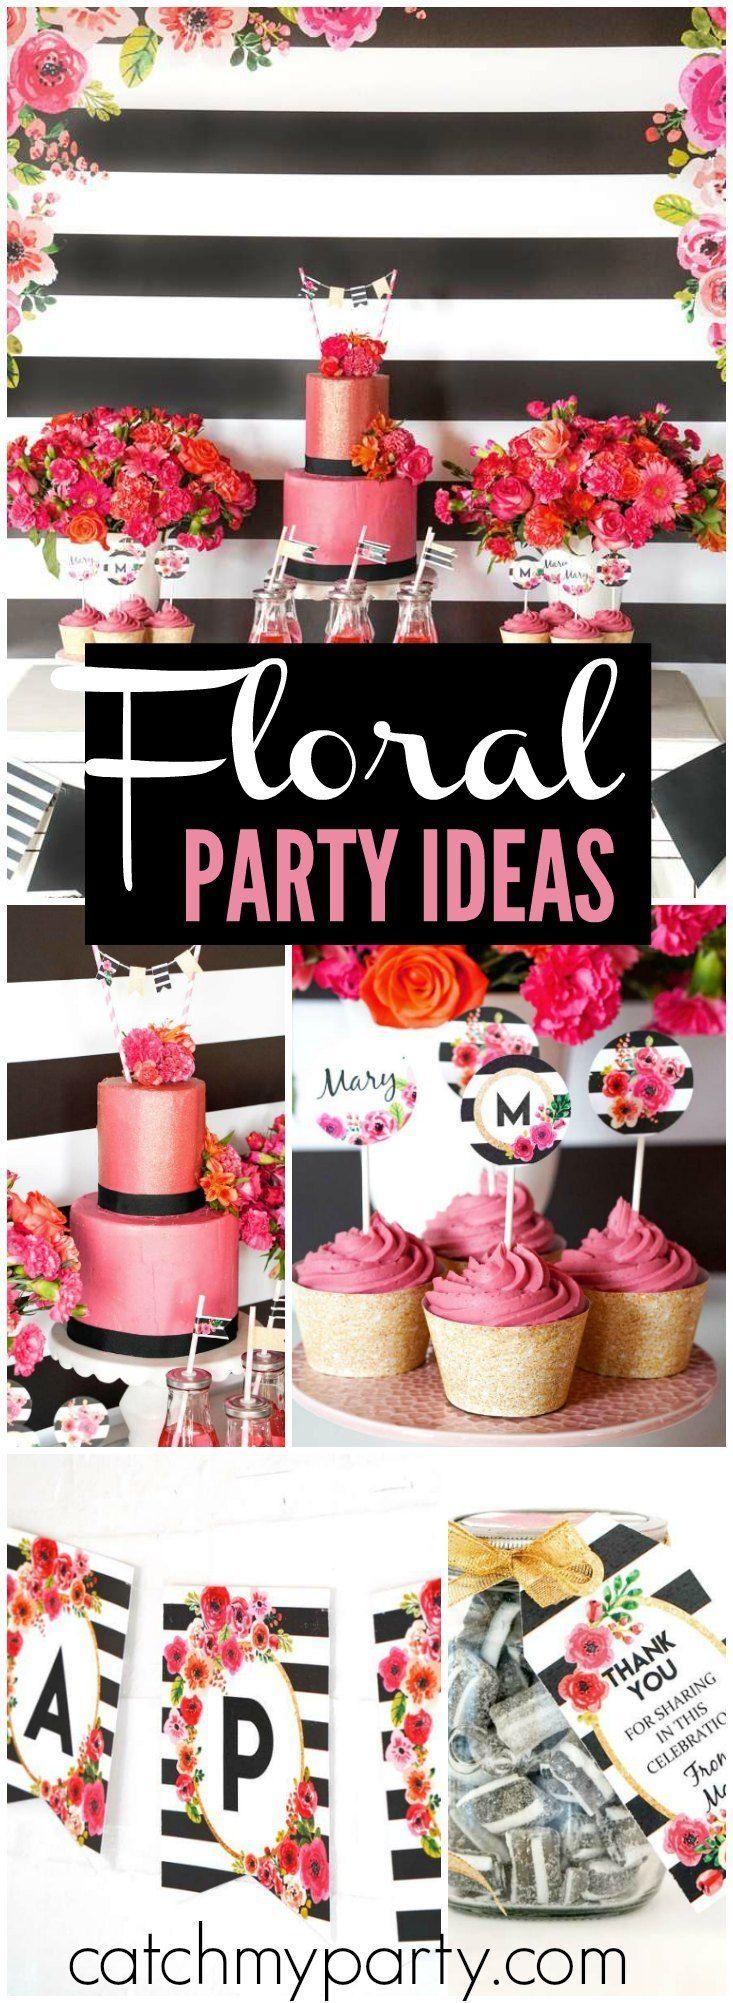 Wedding - Black And White Floral Party / Birthday "Black And White Striped Floral Birthday Party"